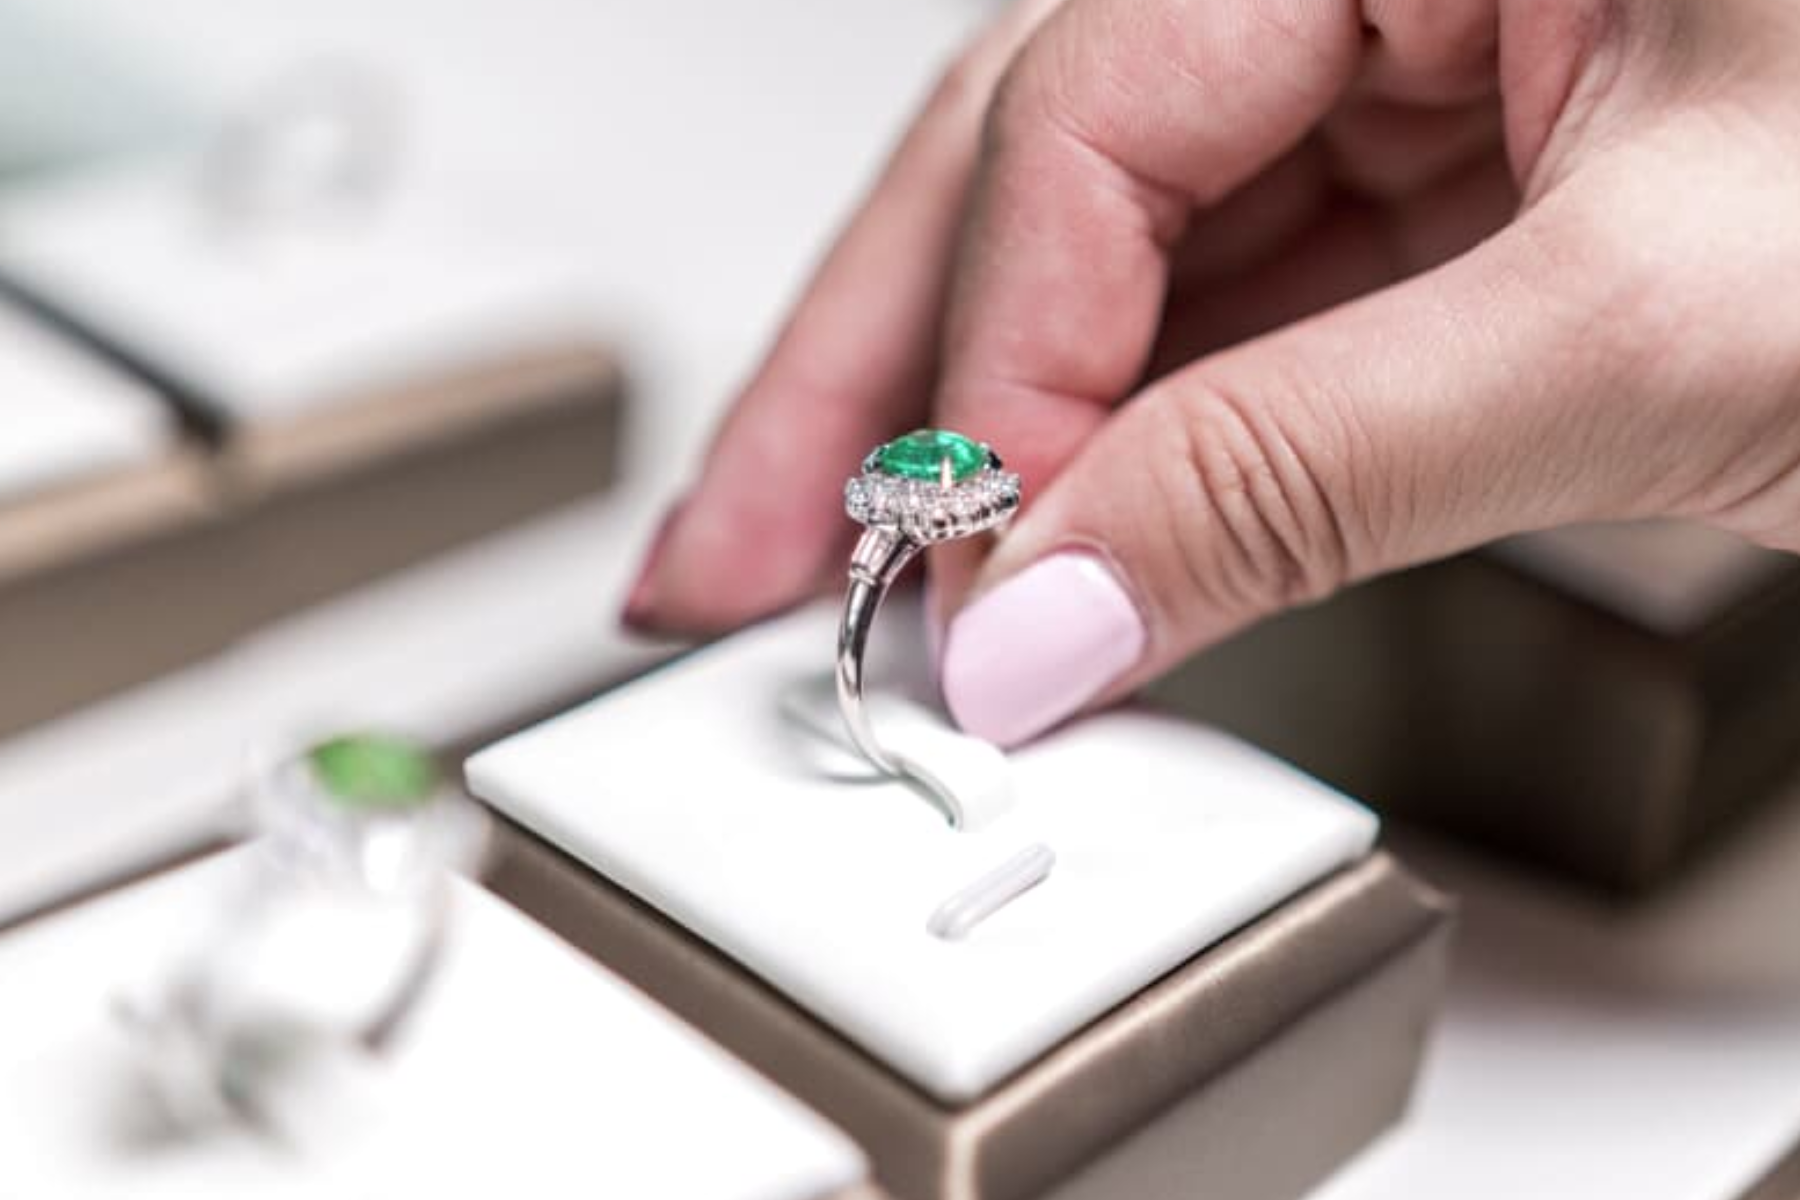 A woman inserts an emerald ring to a ring box